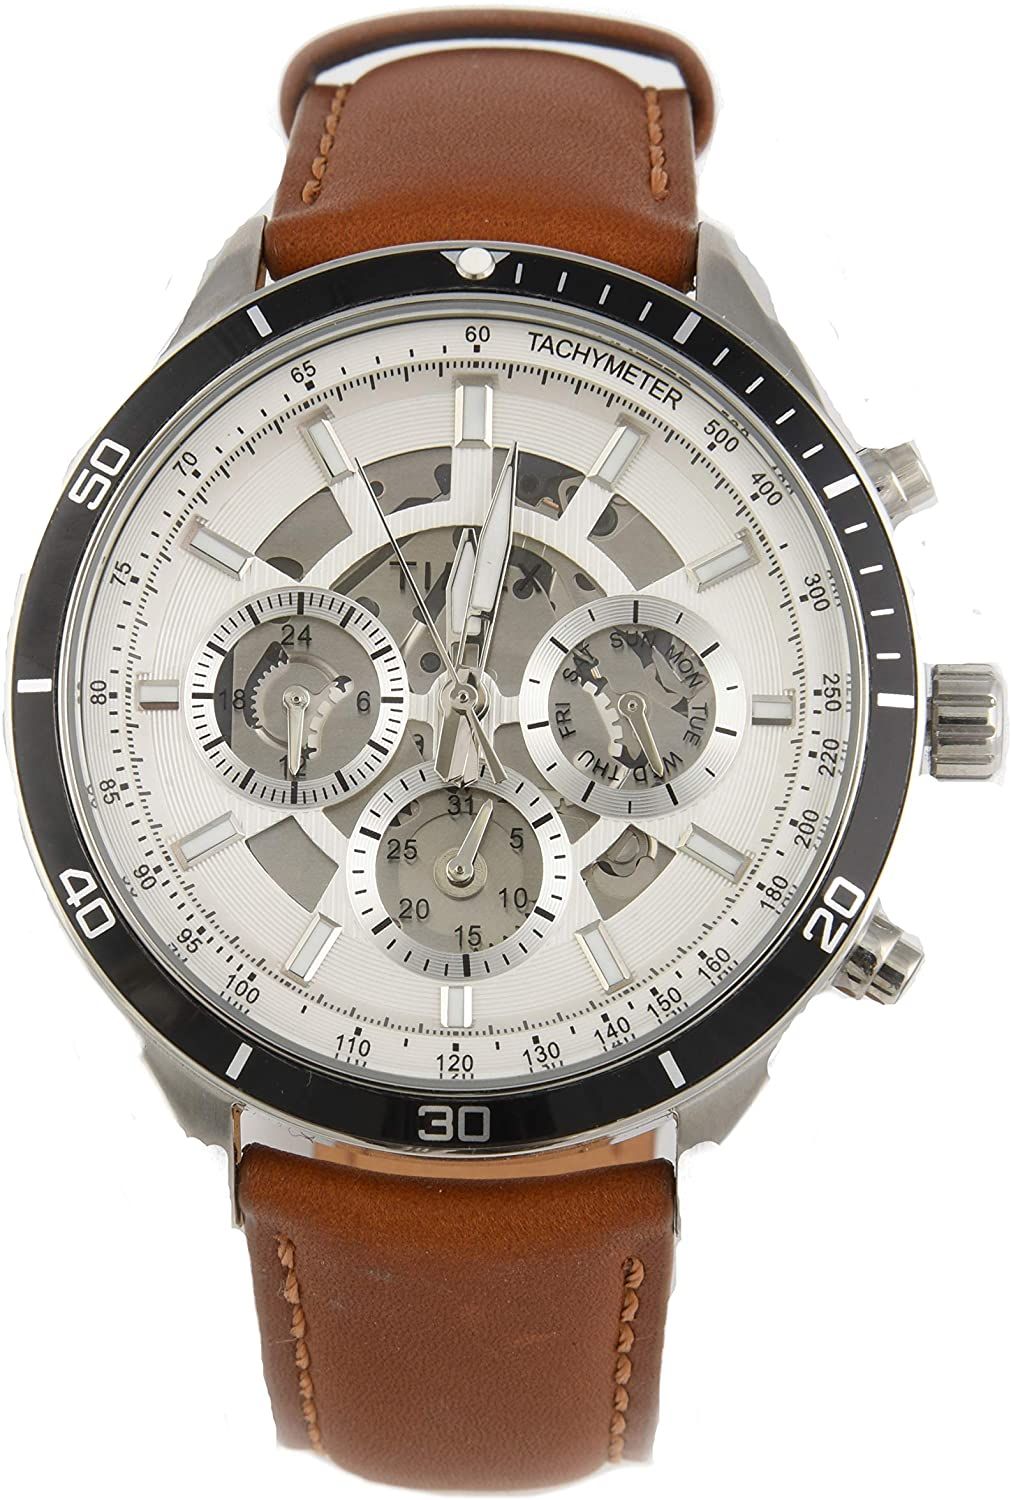 This Timex  Multi Dial Watch for Men is the perfect timepiece to wear or to gift. It's Silver 46 mm Round case combined with the comfortable Brown Leather watch band will ensure you enjoy this stunning timepiece without any compromise. Operated by a high quality Quartz movement and water resistant to 5 bars, your watch will keep ticking. The classic colours will go great with any outfit . It enables you to easily spice up a normal outfit and add style to your life. -The watch has a calendar function: Day-Date, 24-hour Display, Luminous Hands, Tachymeter High quality 21 cm length and 21 mm width Brown Leather strap with a Buckle Case diameter: 46 mm,case thickness: 13 mm, case colour: Silver and dial colour: Multicolour